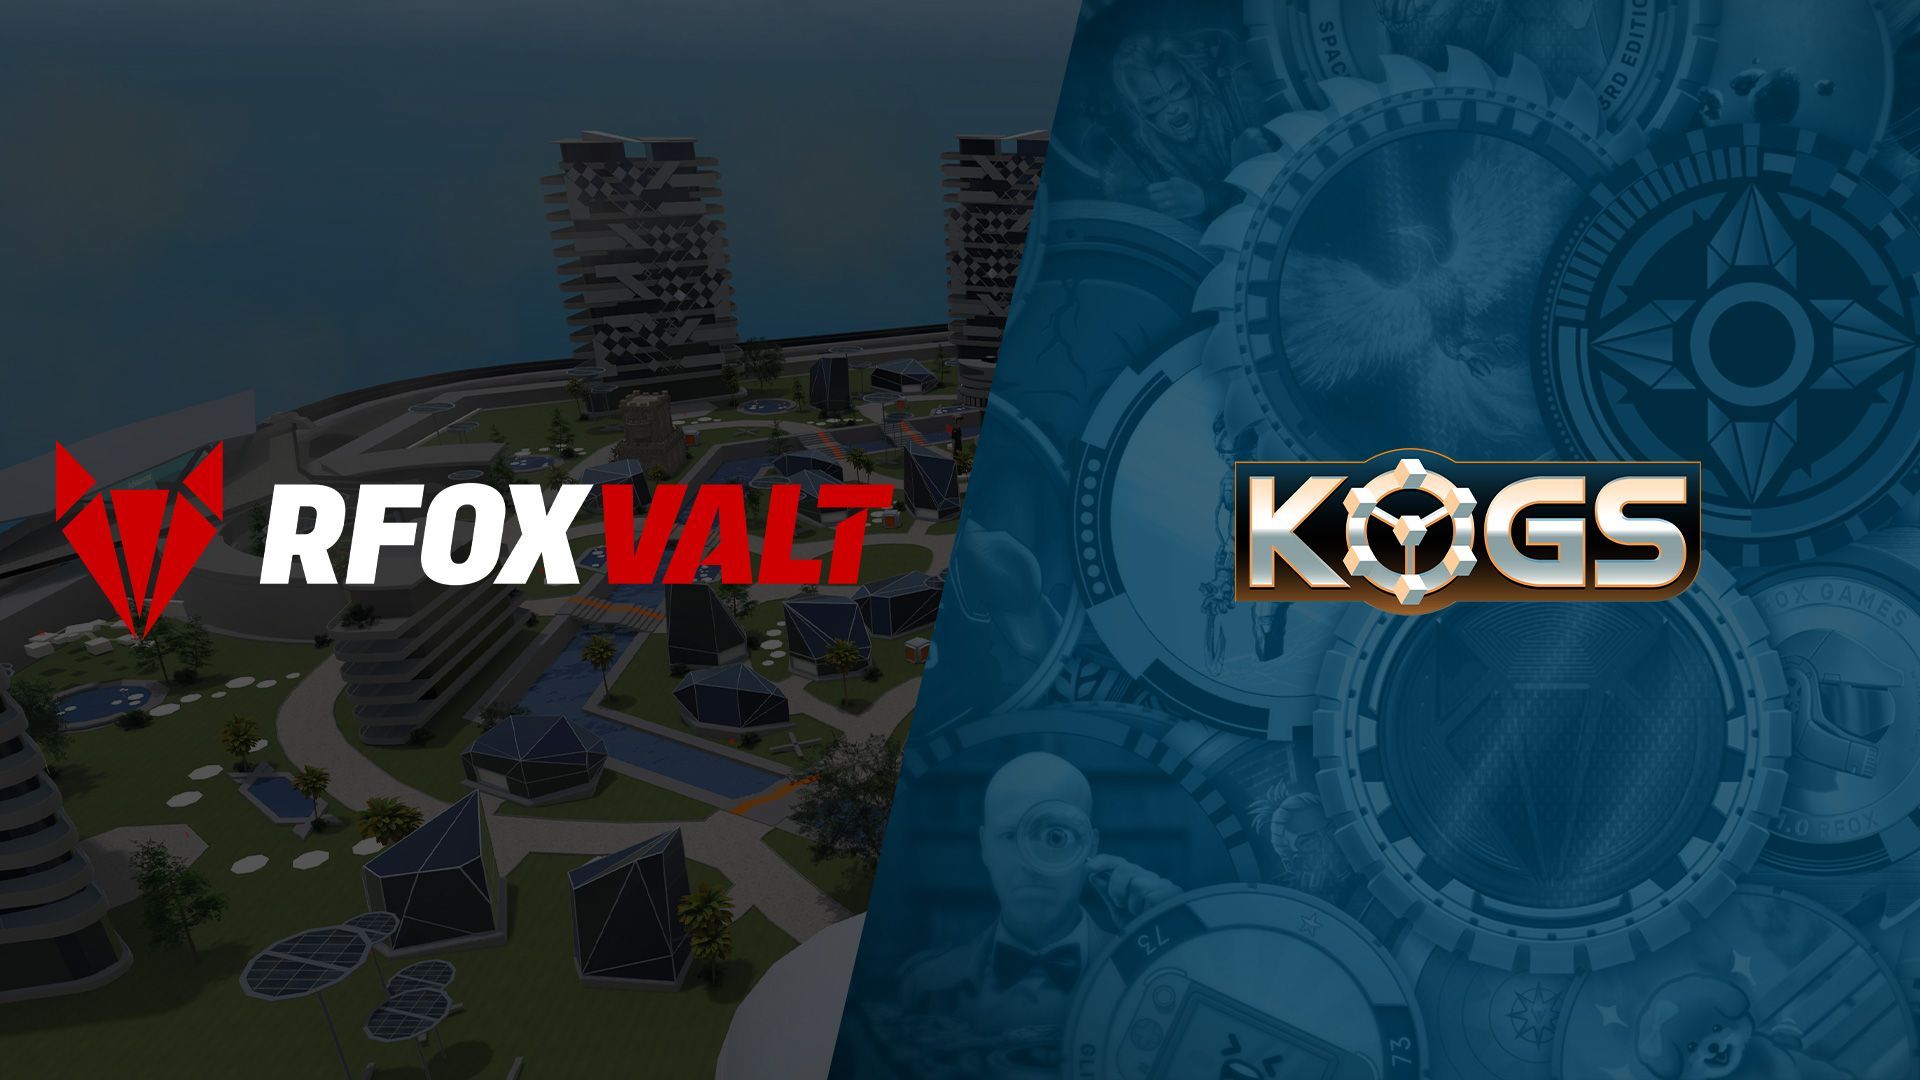 RFOX VALT and KOGs logo side-by-side with a metaverse and slammers background